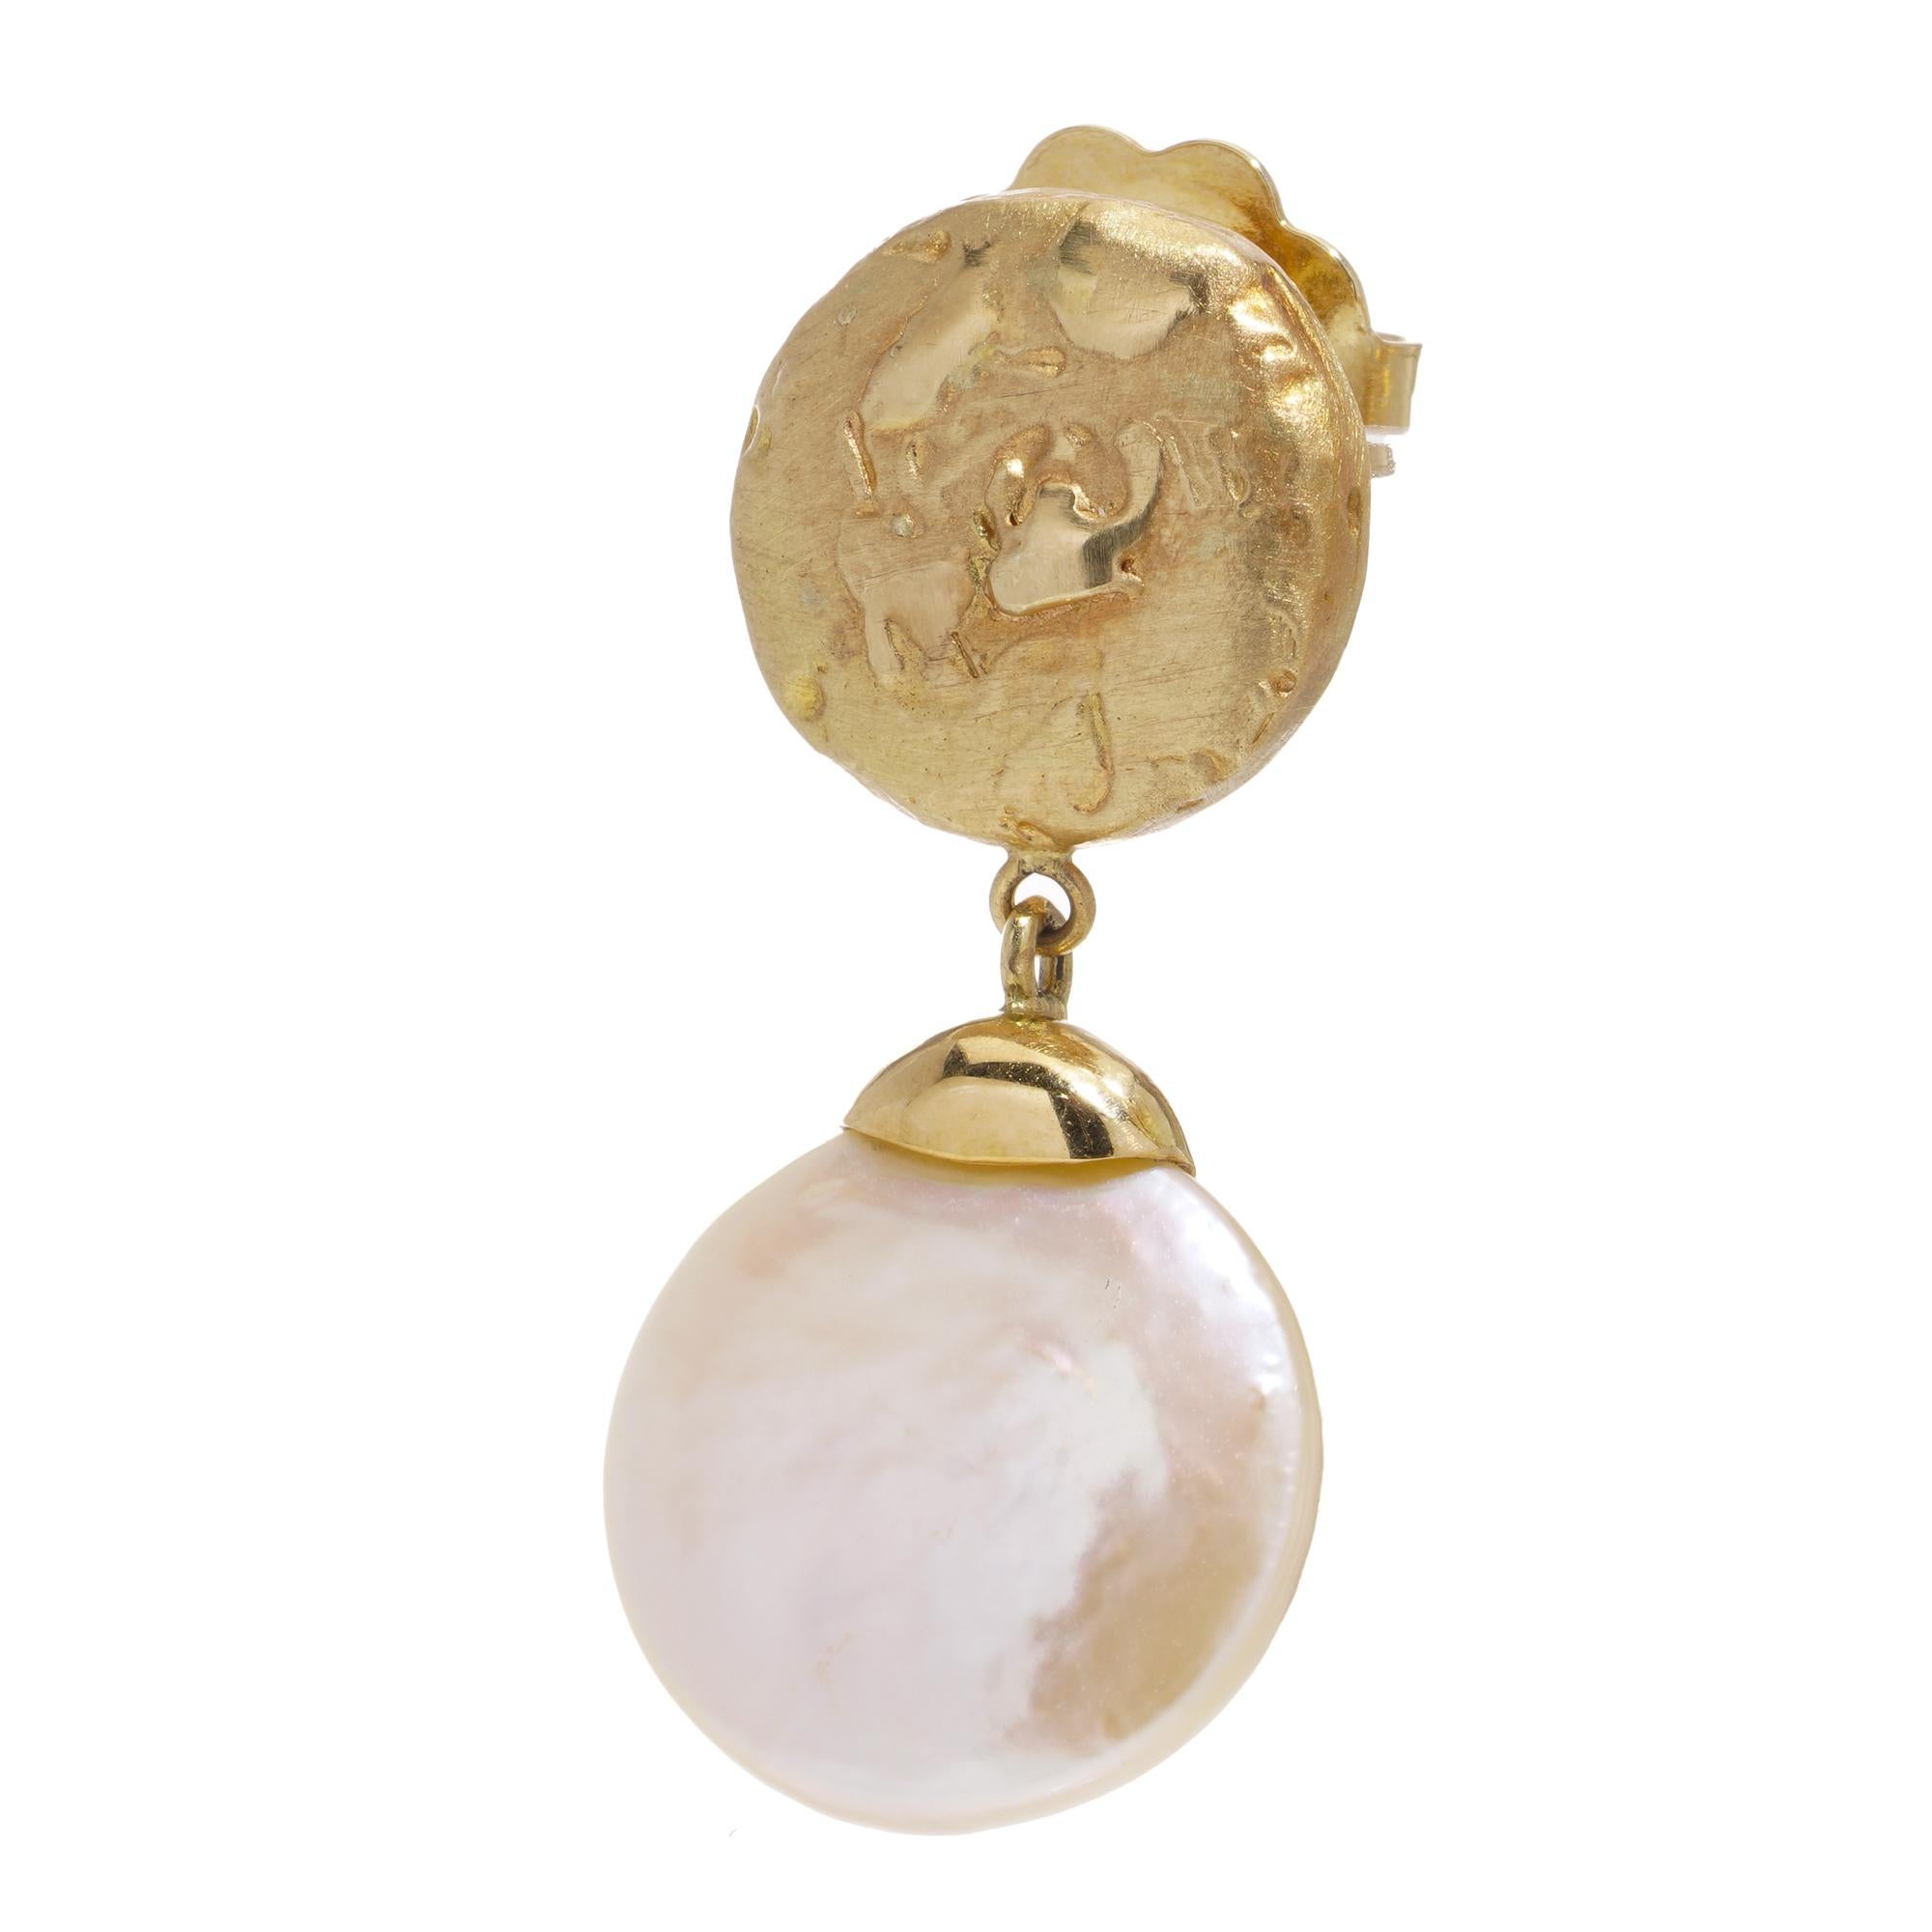 18kt yellow gold pair of dangle earrings with Freshwater Coin Pearls. 
Hallmarked with 750 gold mark. 

Dimensions:
Length width: 3.1 x 1.4 cm 
Weight: 9.00 grams 

Pearls -
Quantity: 2
Cut: Round 
Size: 14 mm in diameter
5 mm in depth 

Condition: